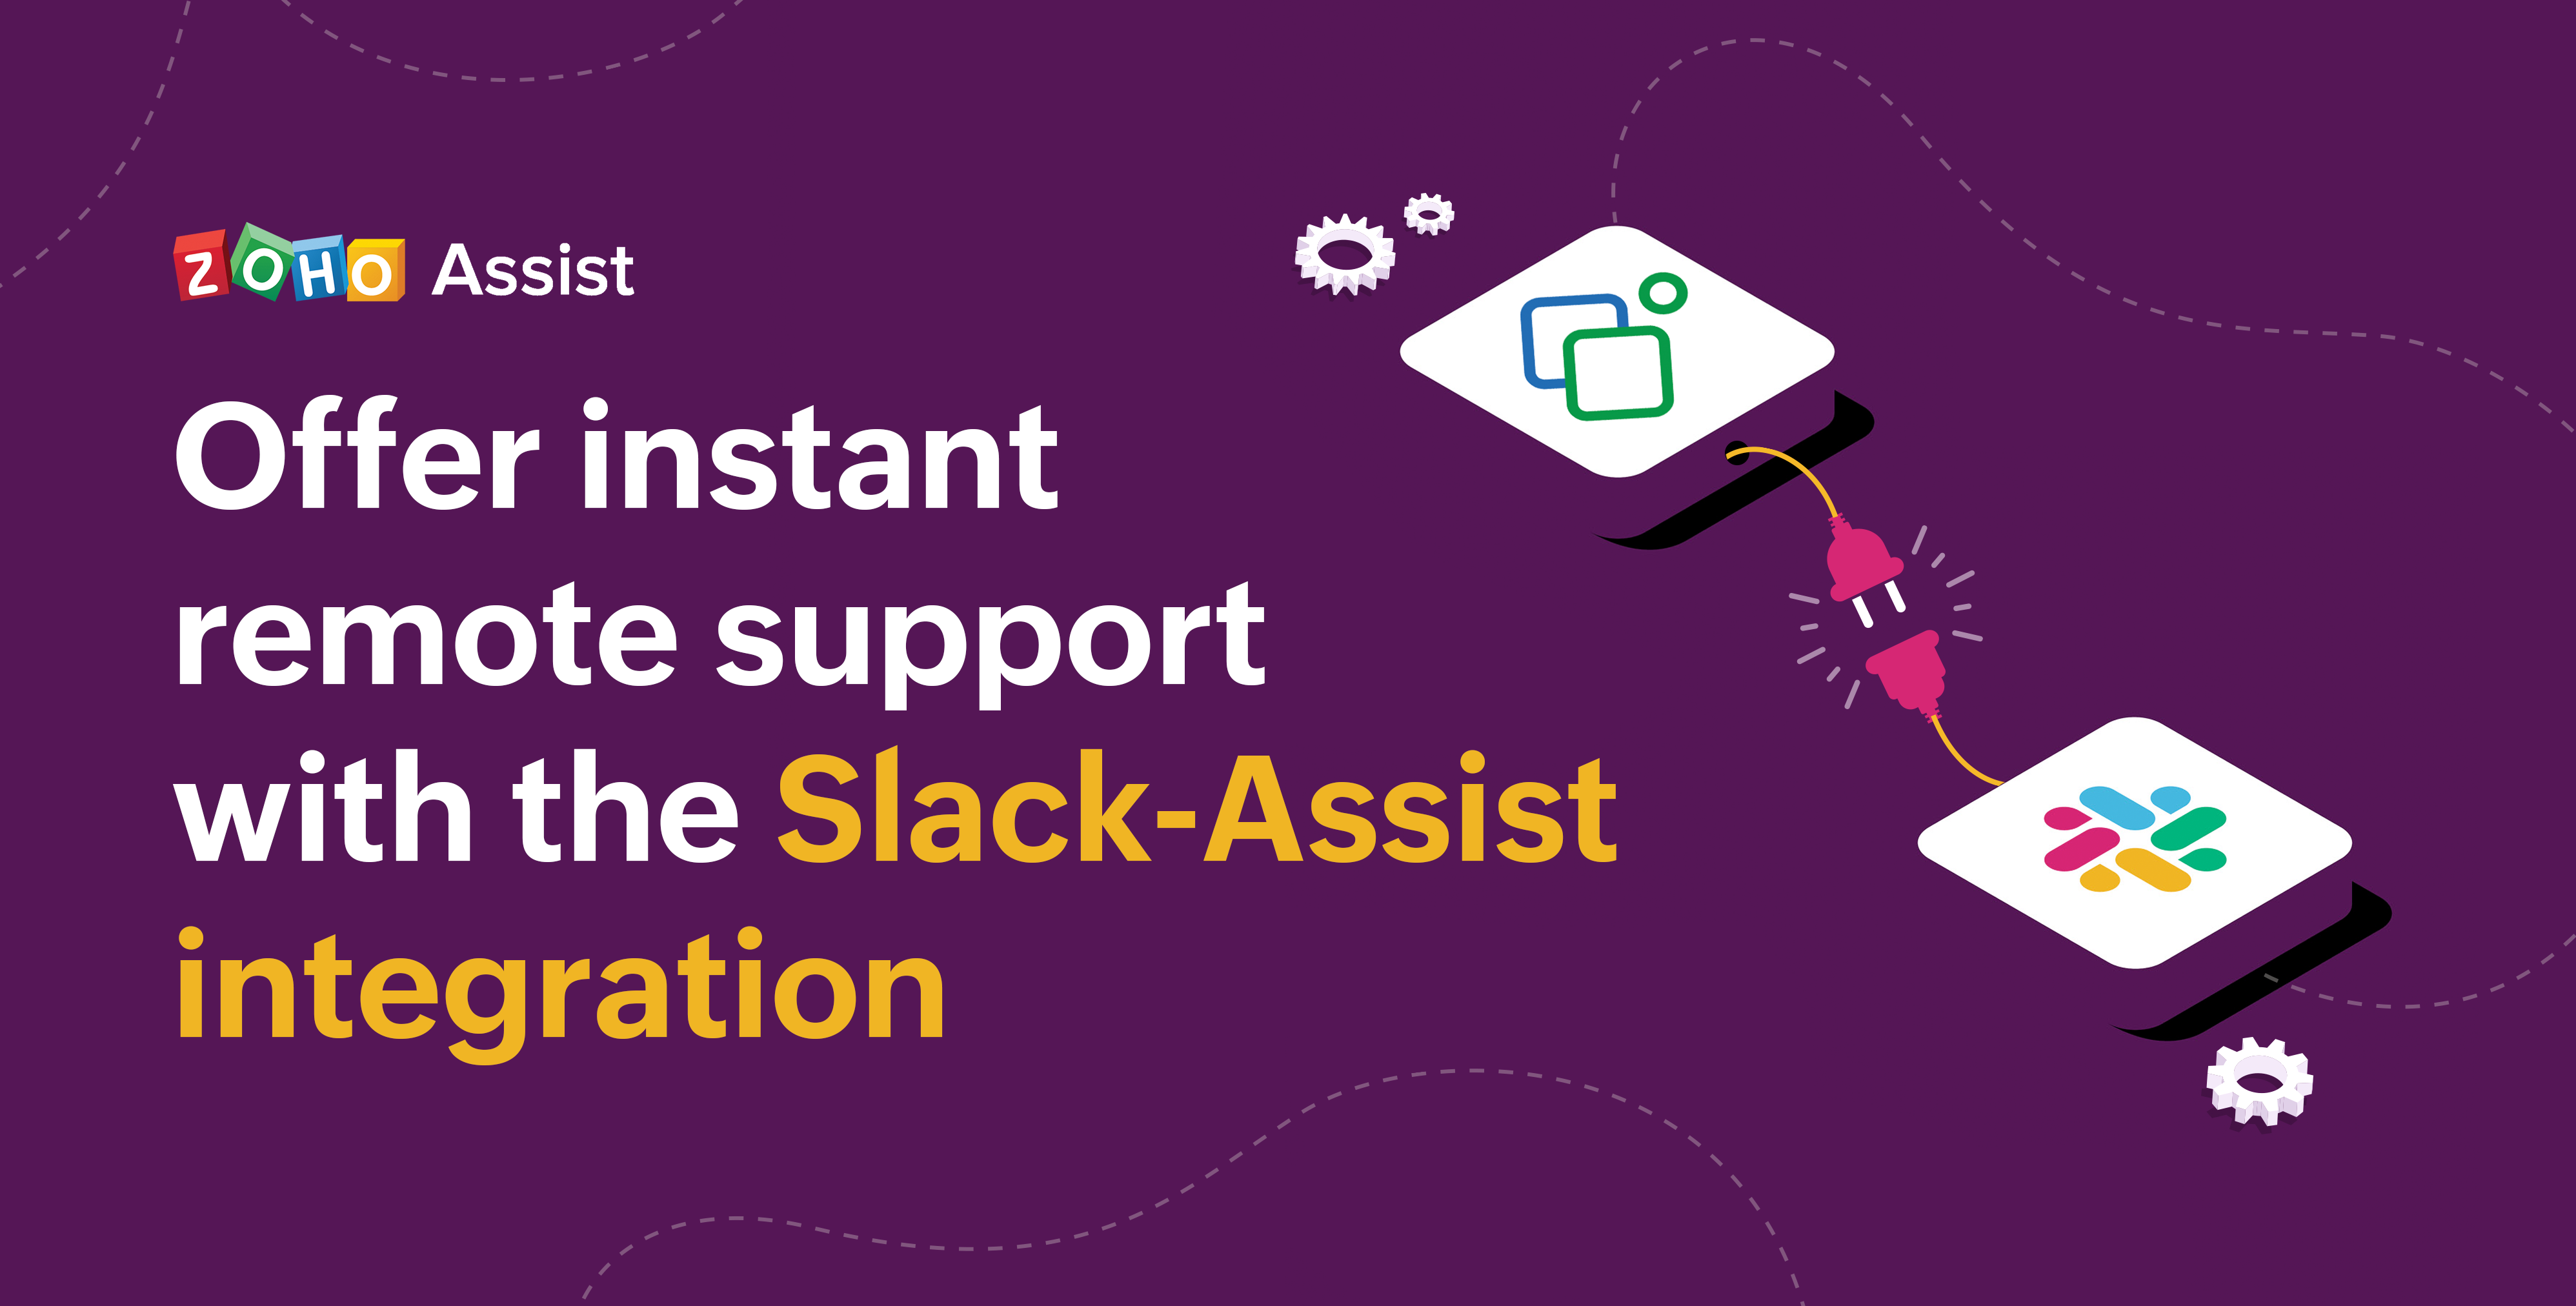 Gain control of a remote PC, Mac, or mobile device to provide remote support from Slack